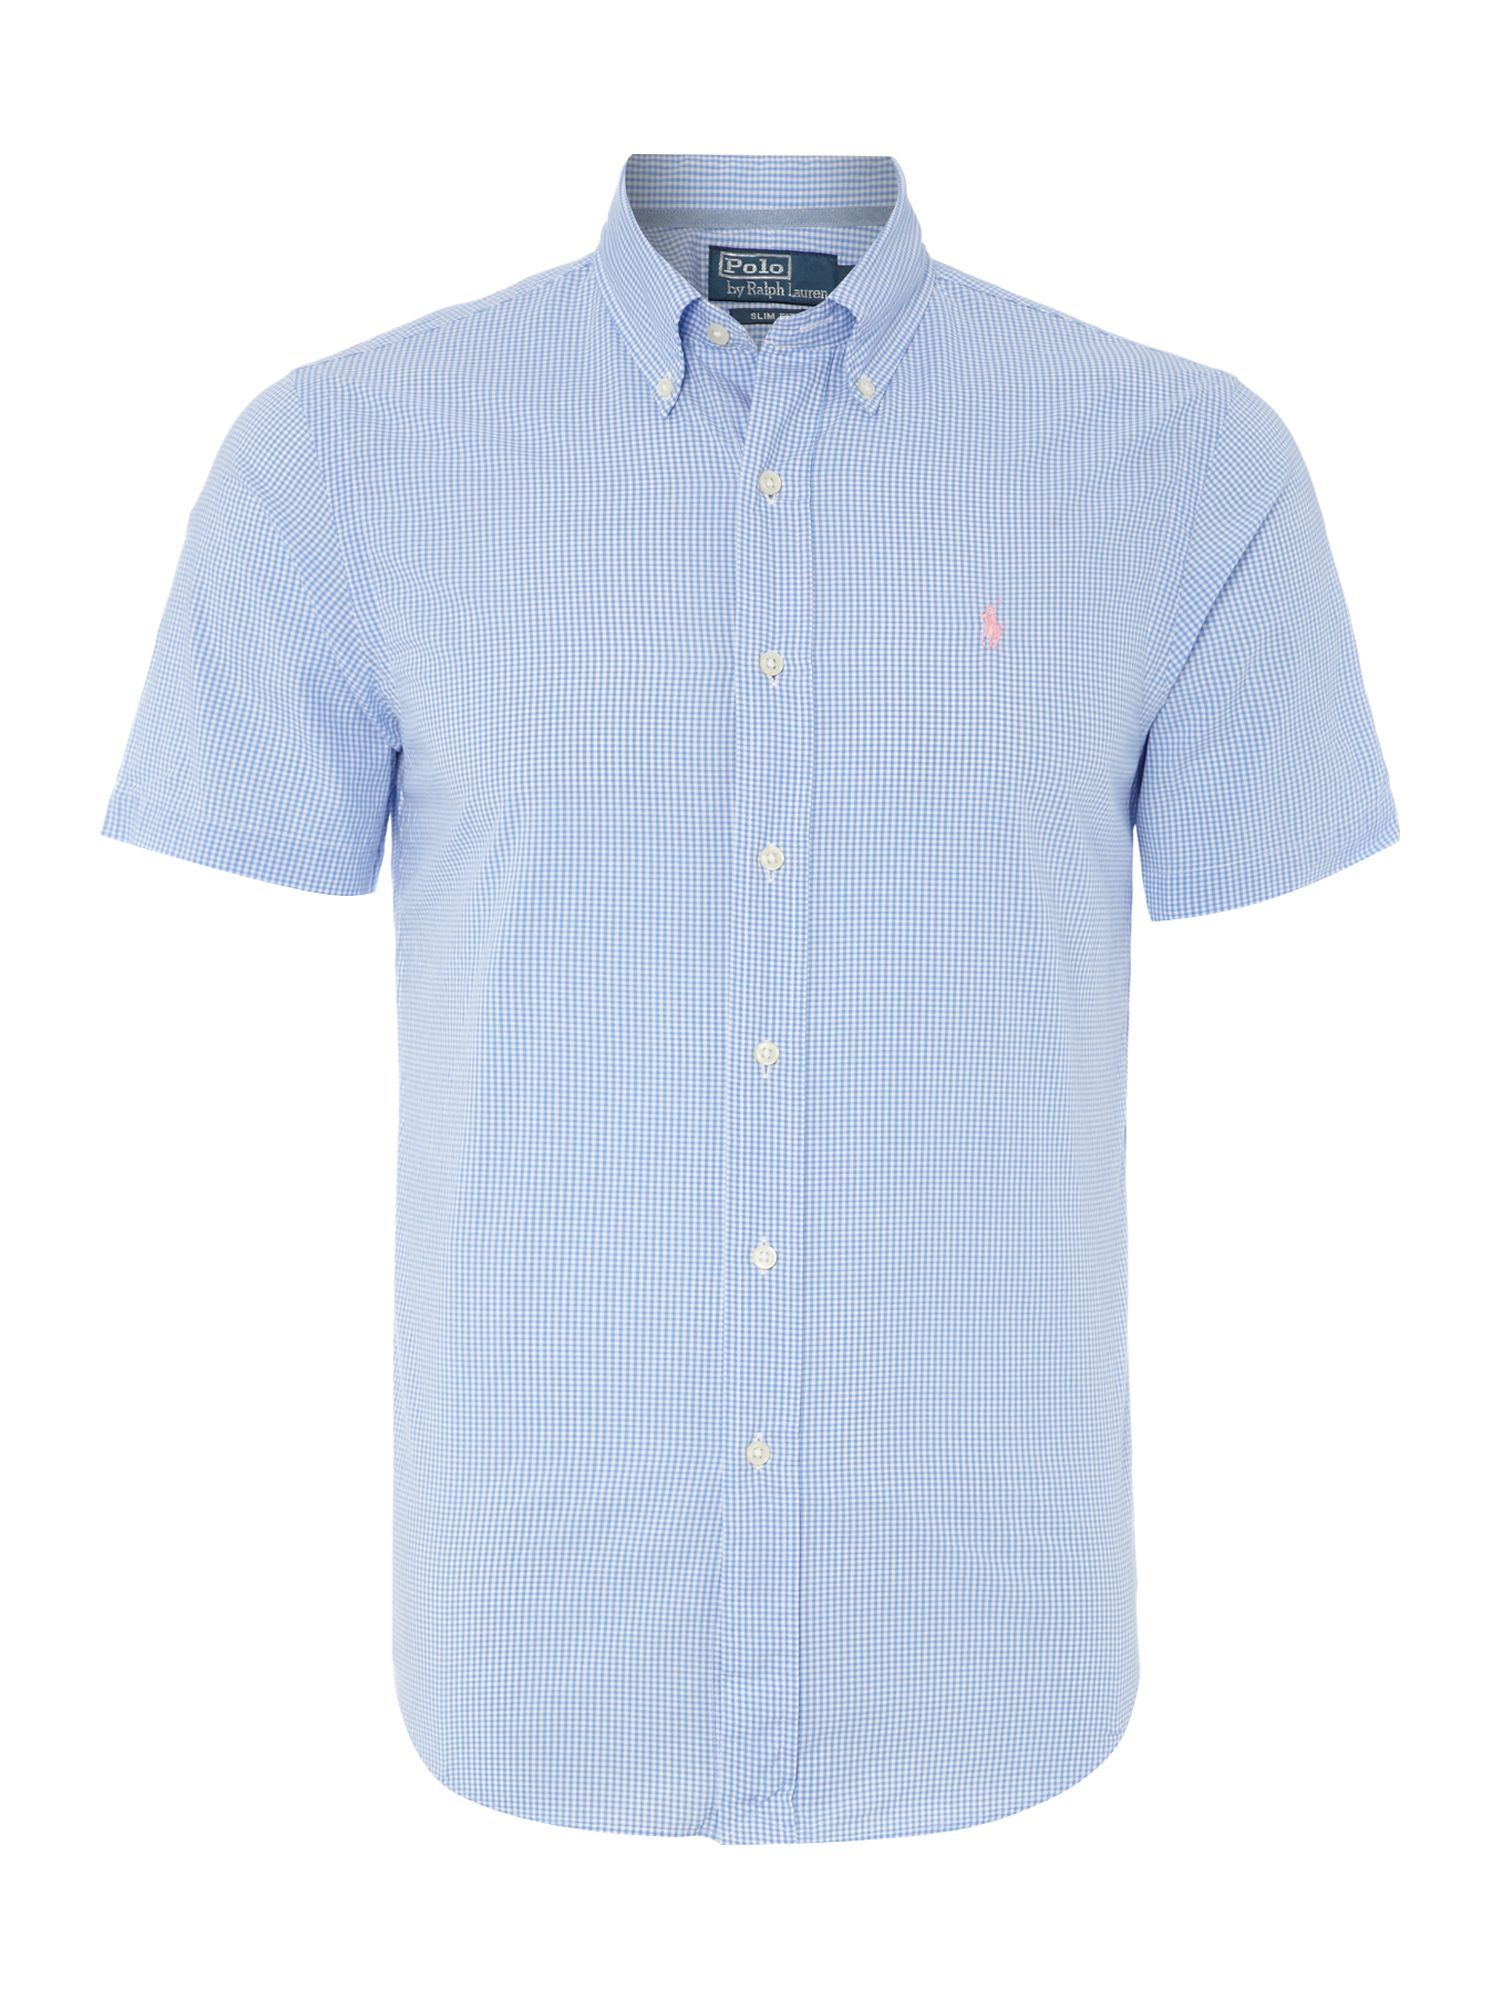 Polo ralph lauren Short Sleeve Micro Gingham Slim Fit Shirt in Blue for ...